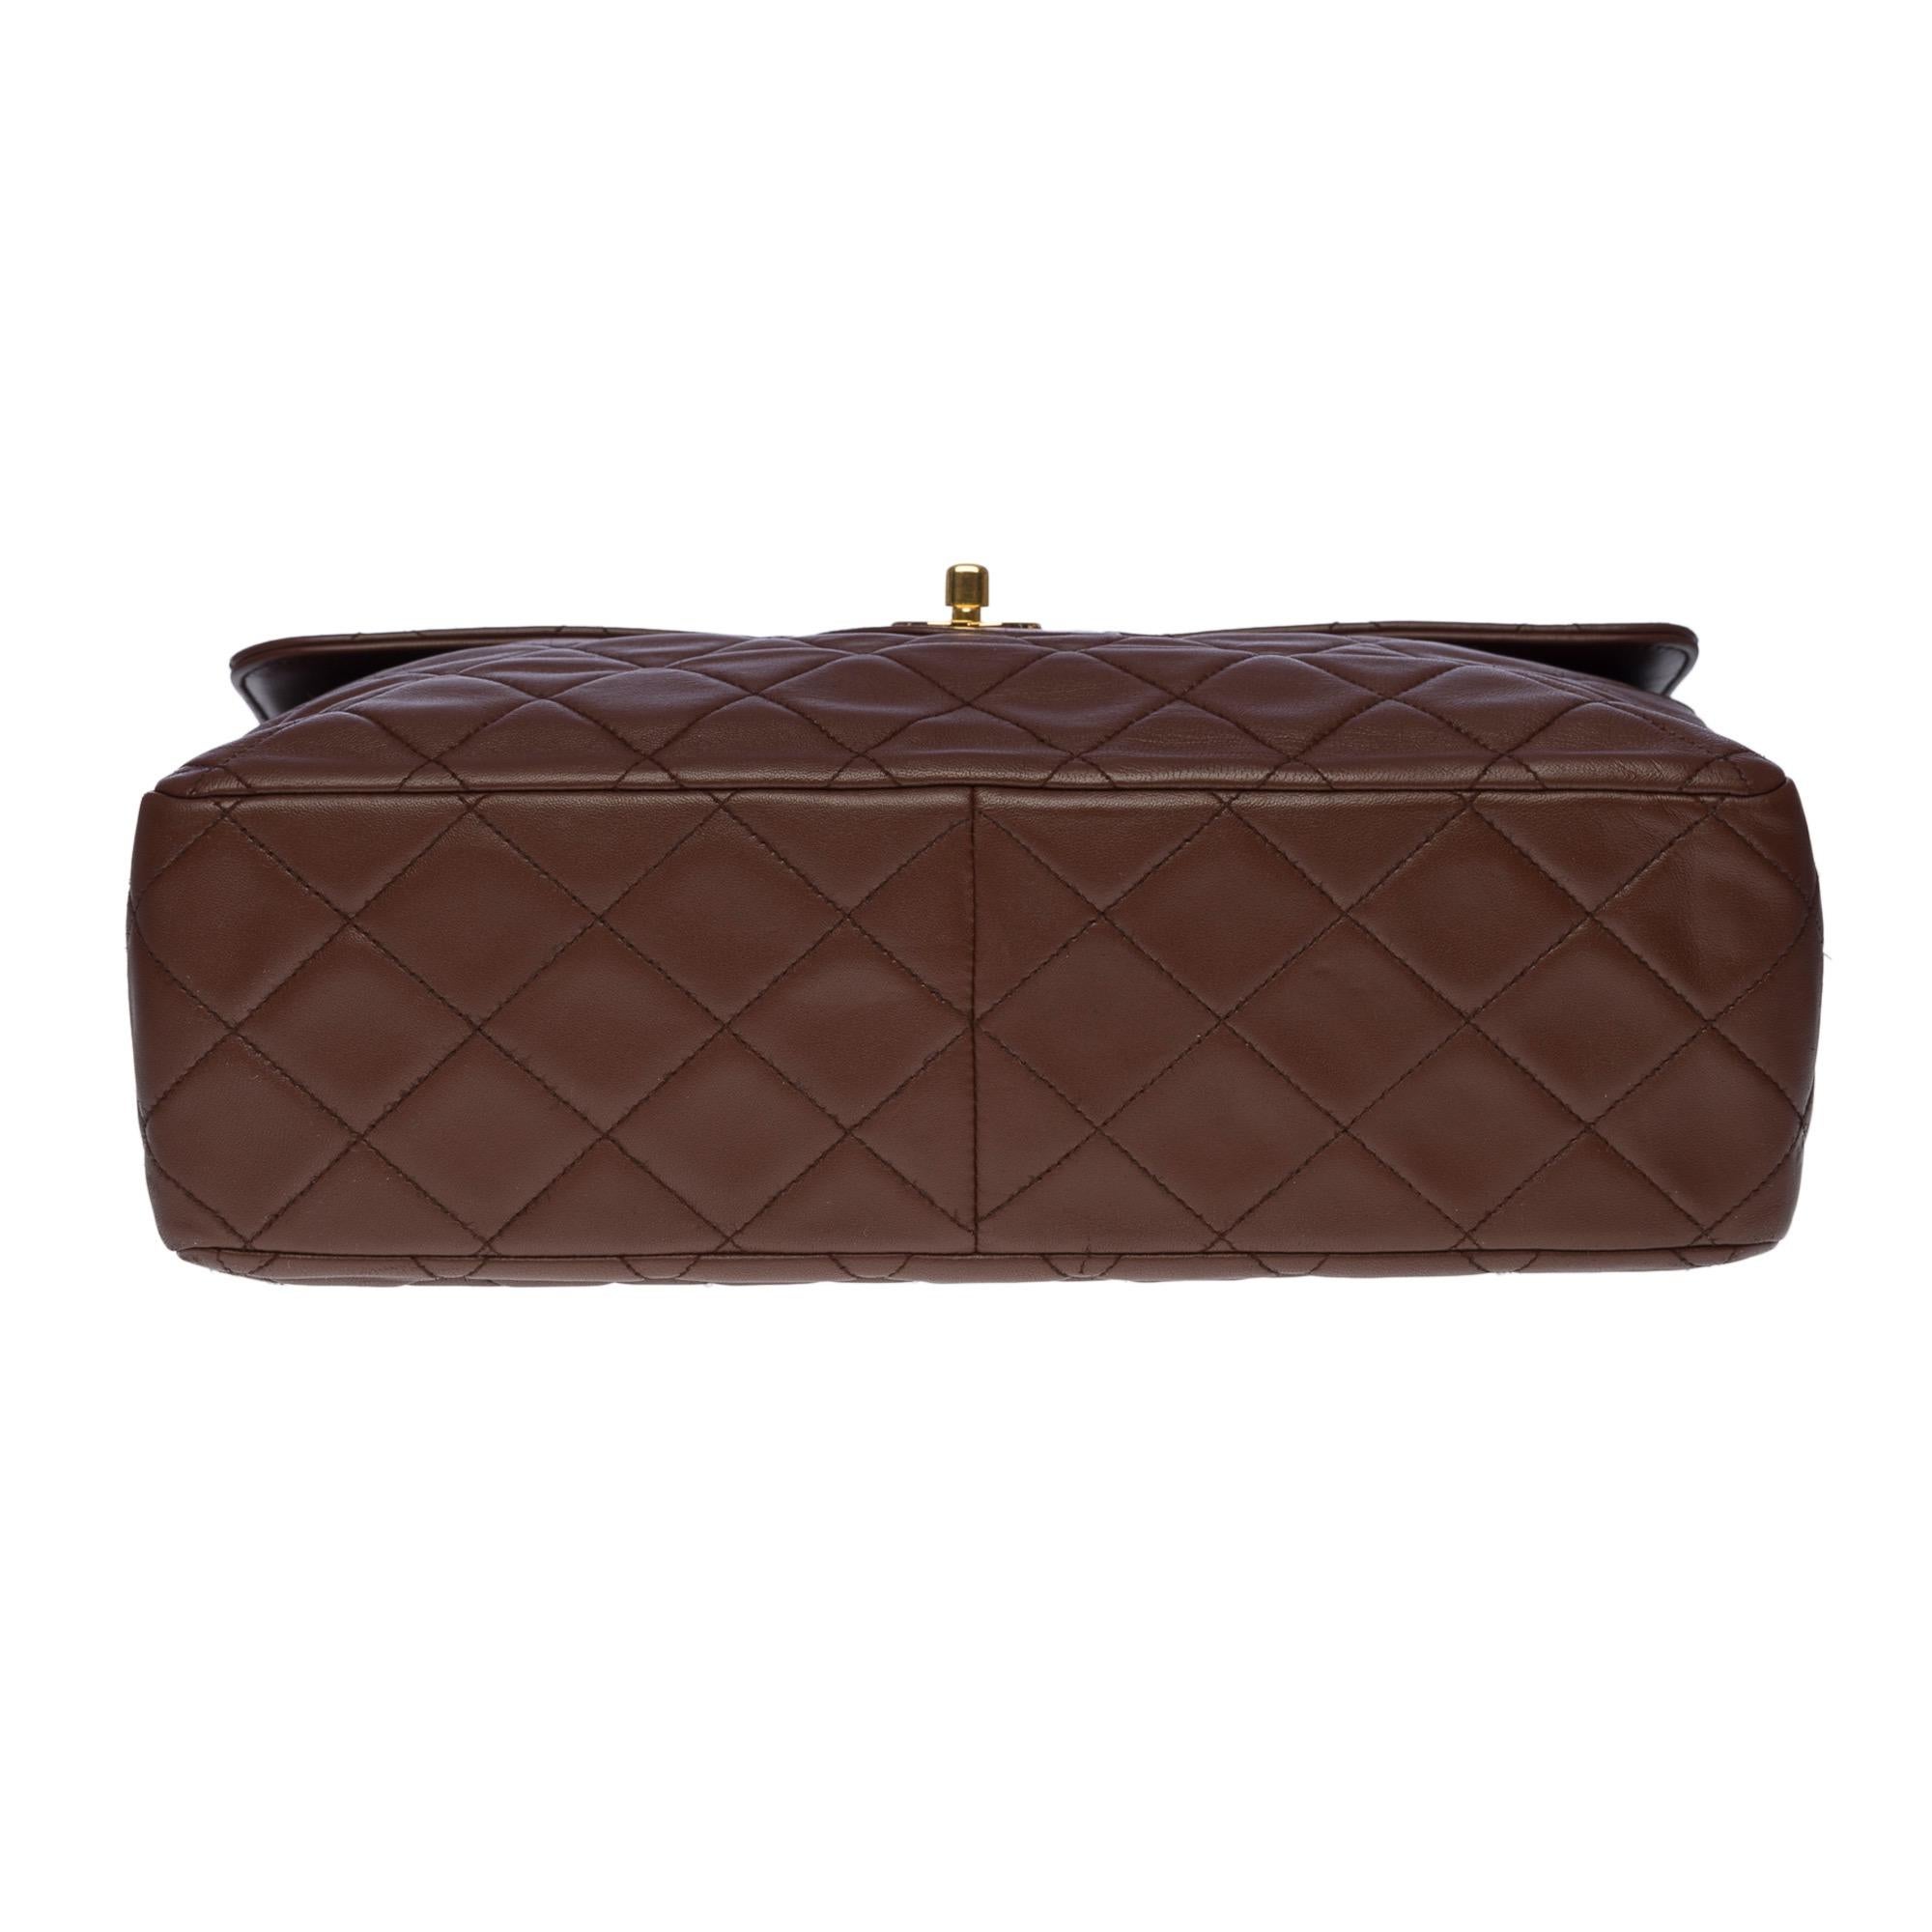 Majestic Chanel Timeless/Classic jumbo flap bag in brown quilted leather, GHW For Sale 4